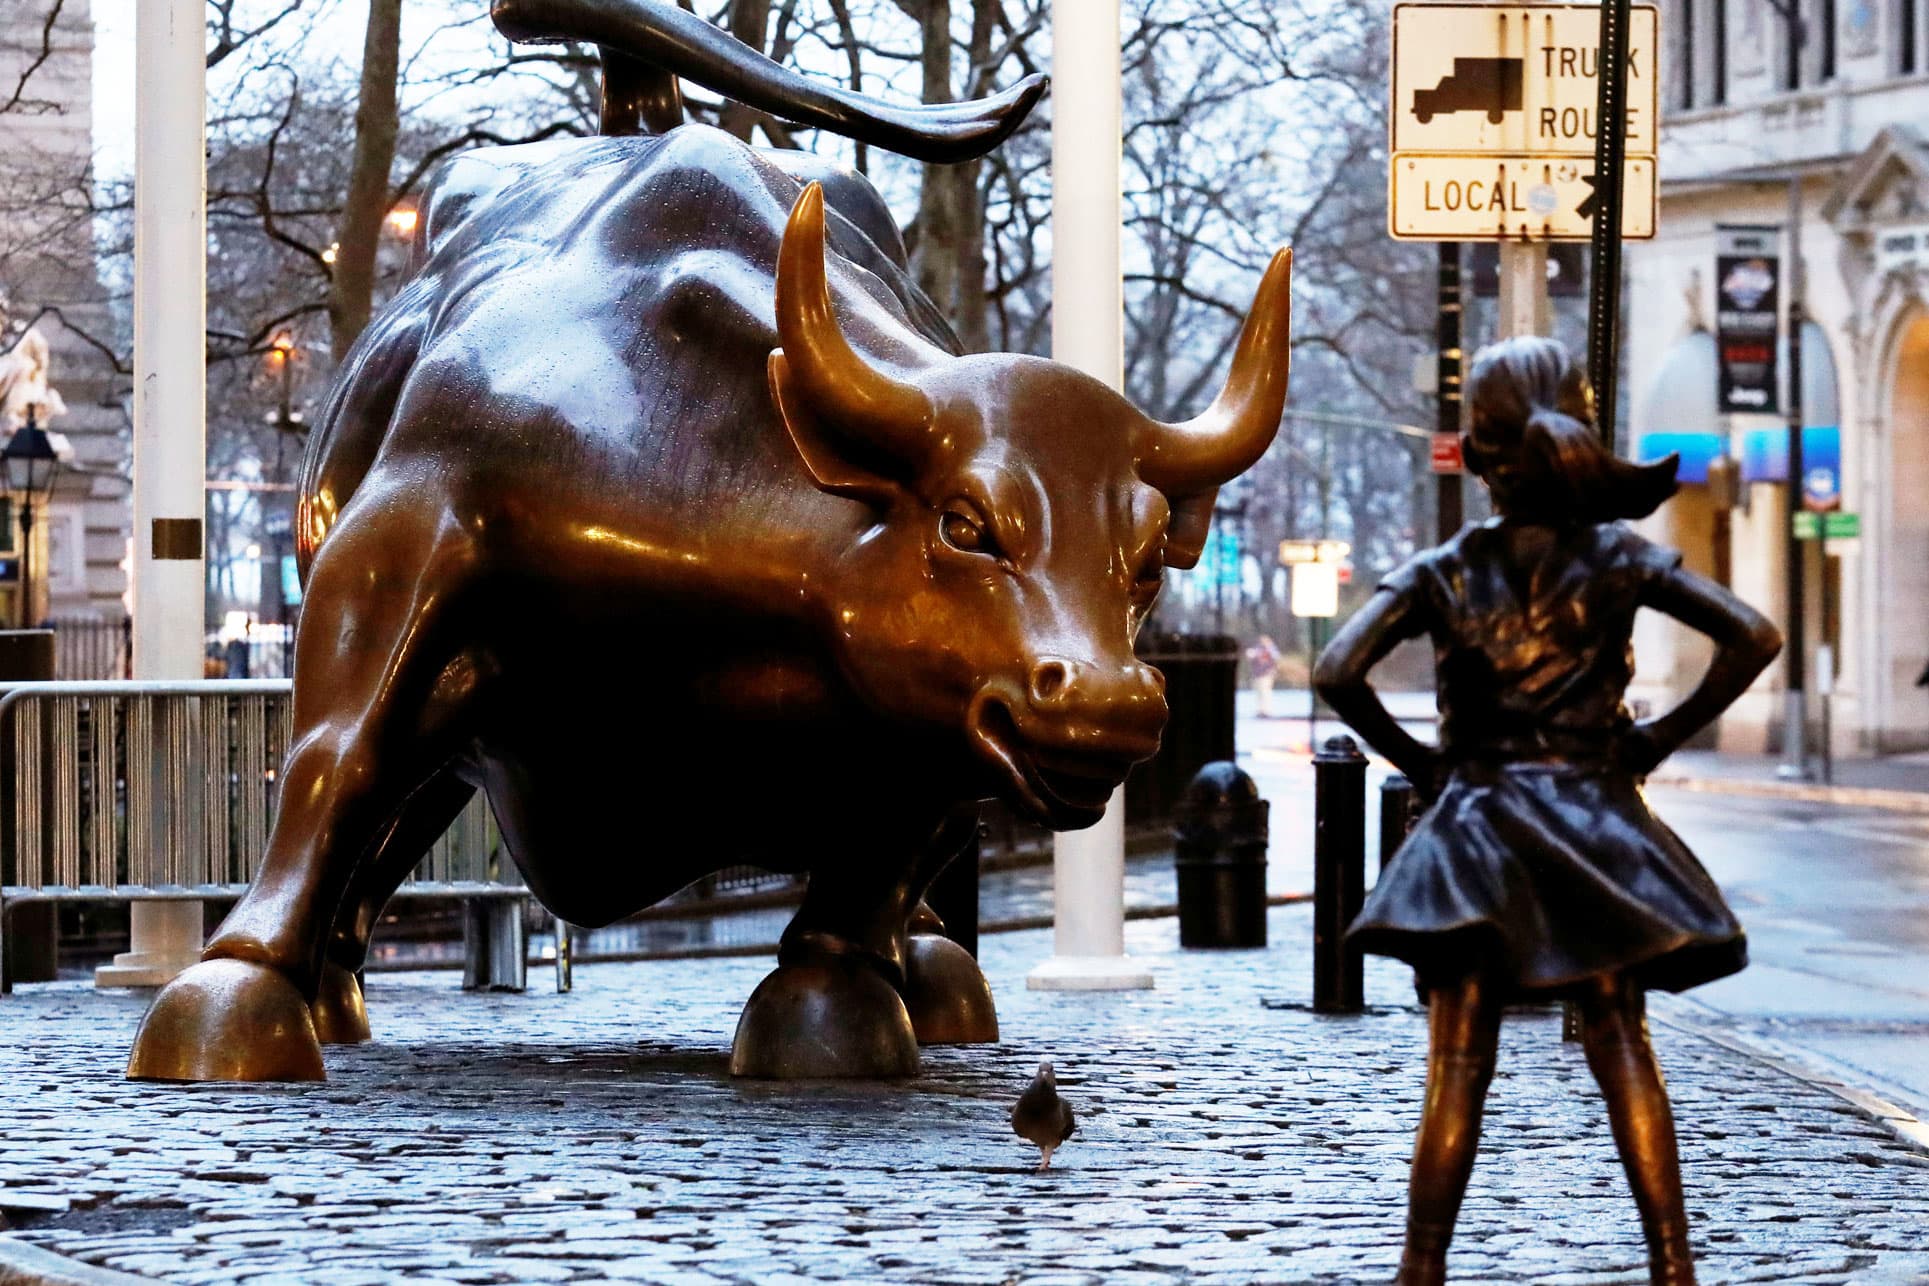 This bull market might not be hated, but it still isn't trusted